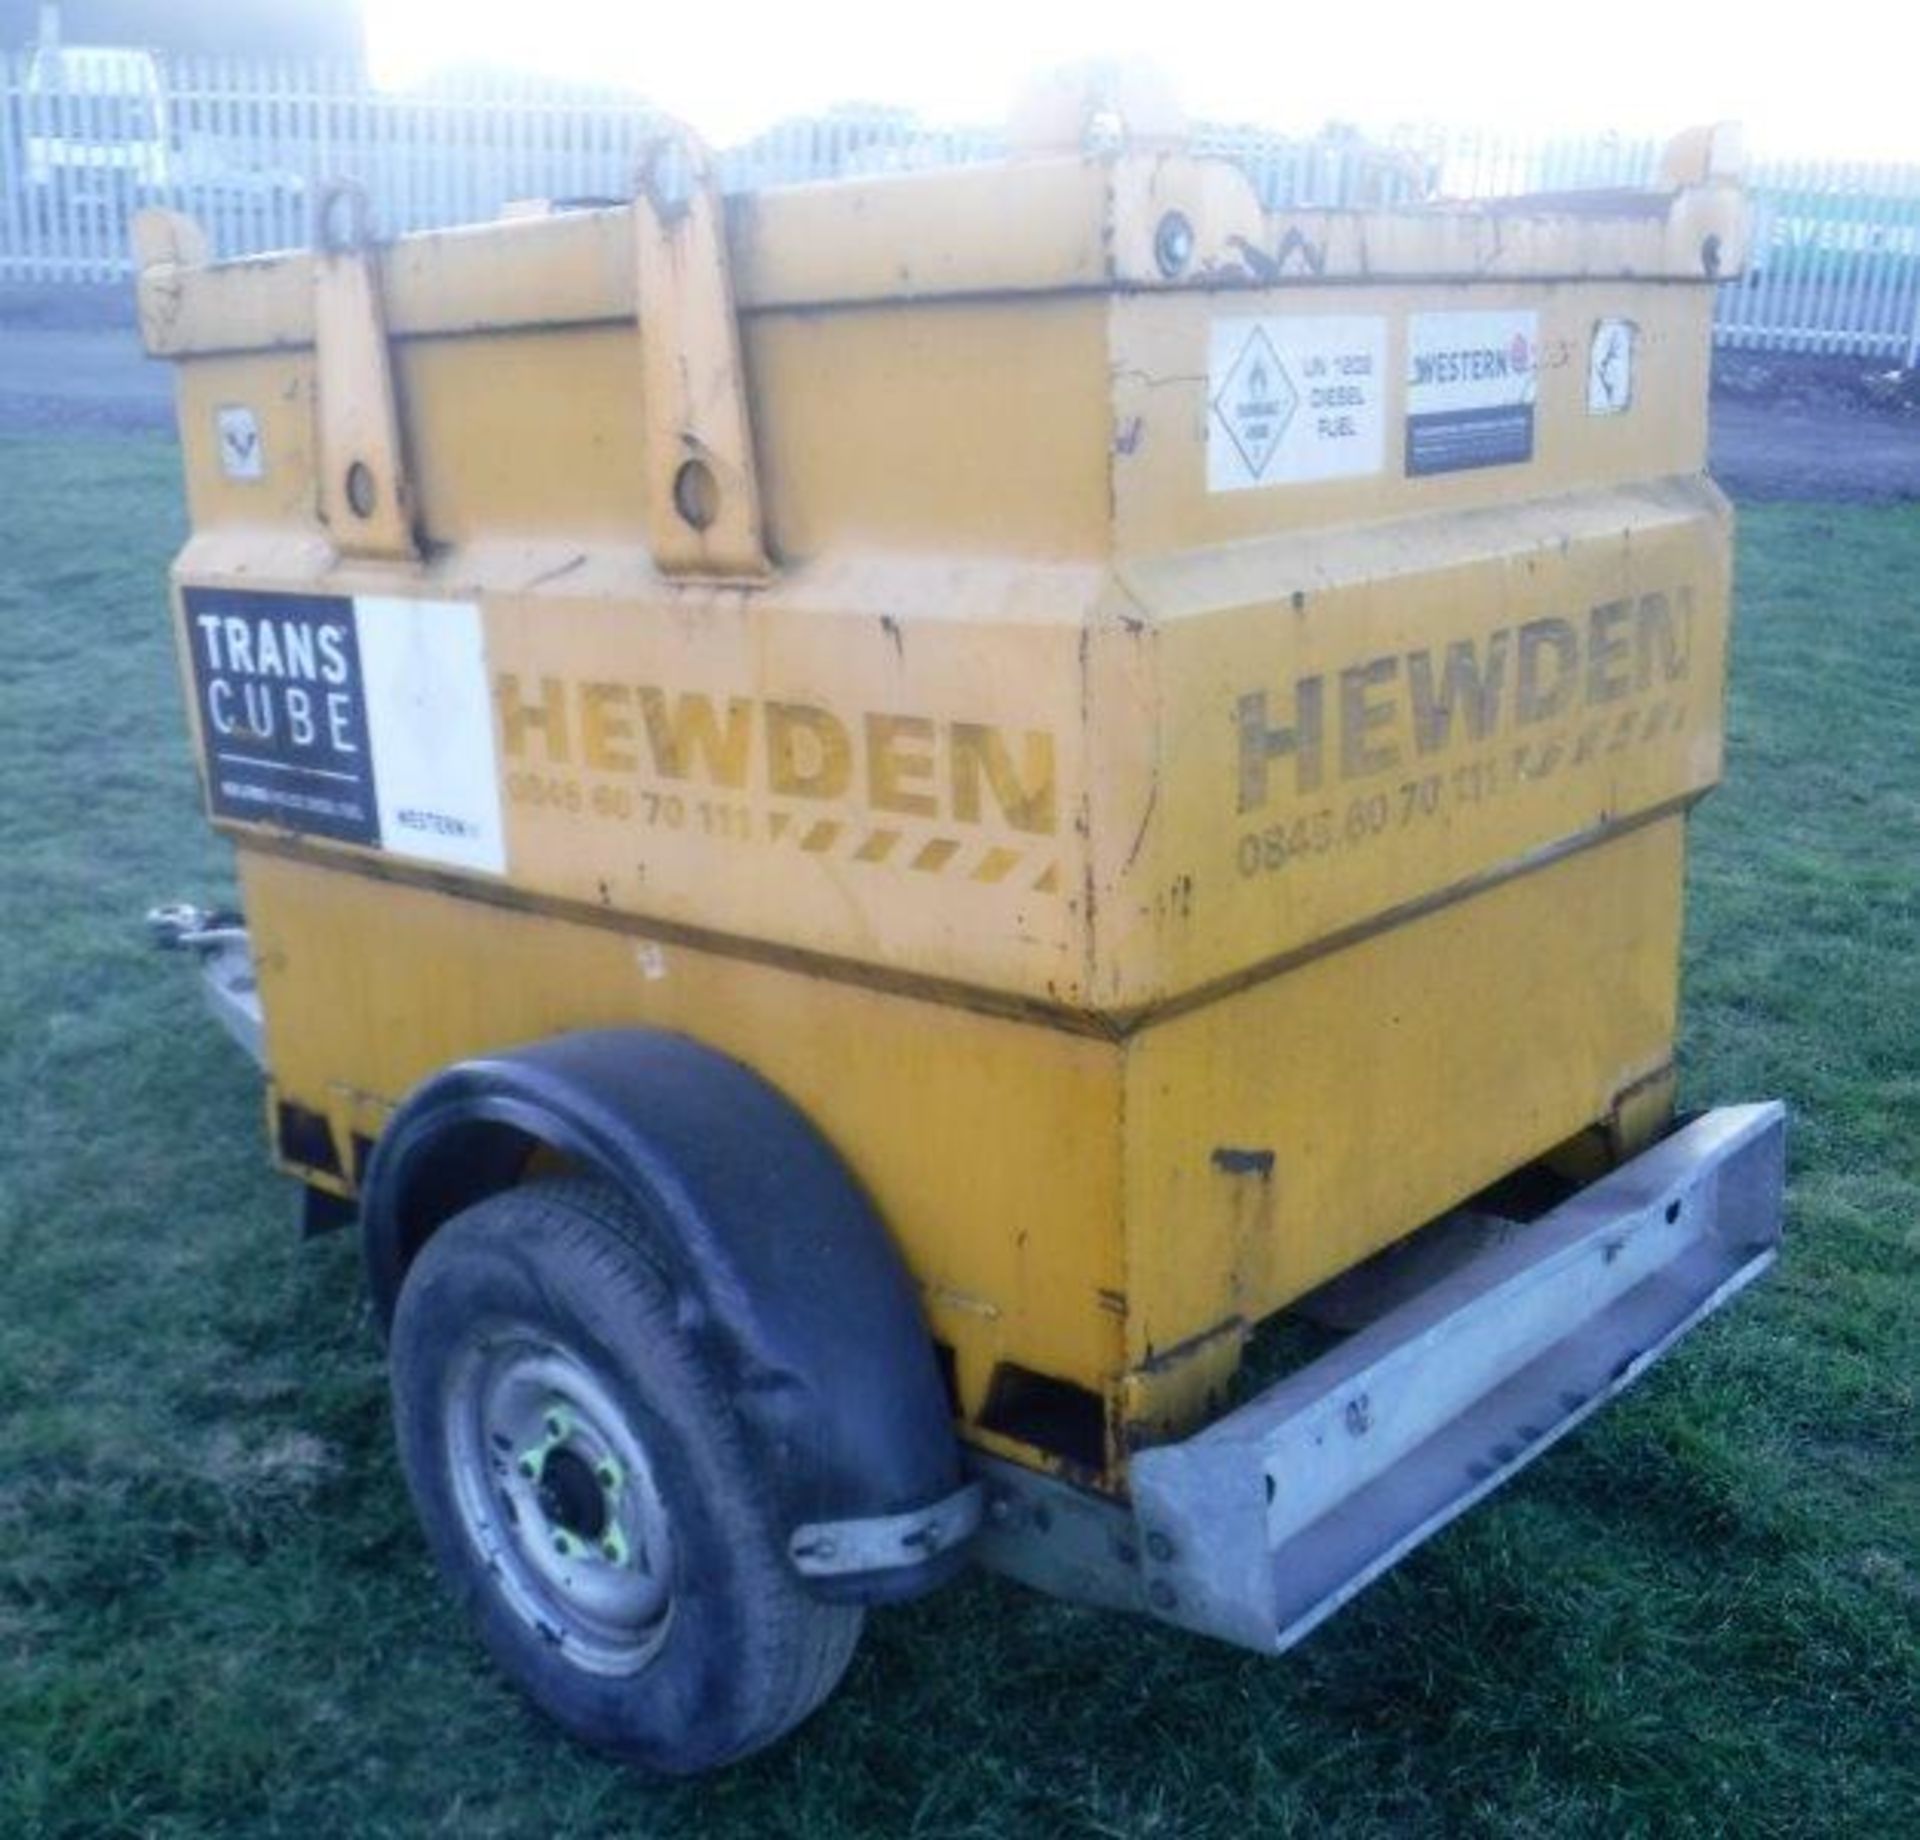 2008 WESTERN fastow 950ltr trans cube fuel bowser S/N 070505413997 (5007607) - Image 14 of 20